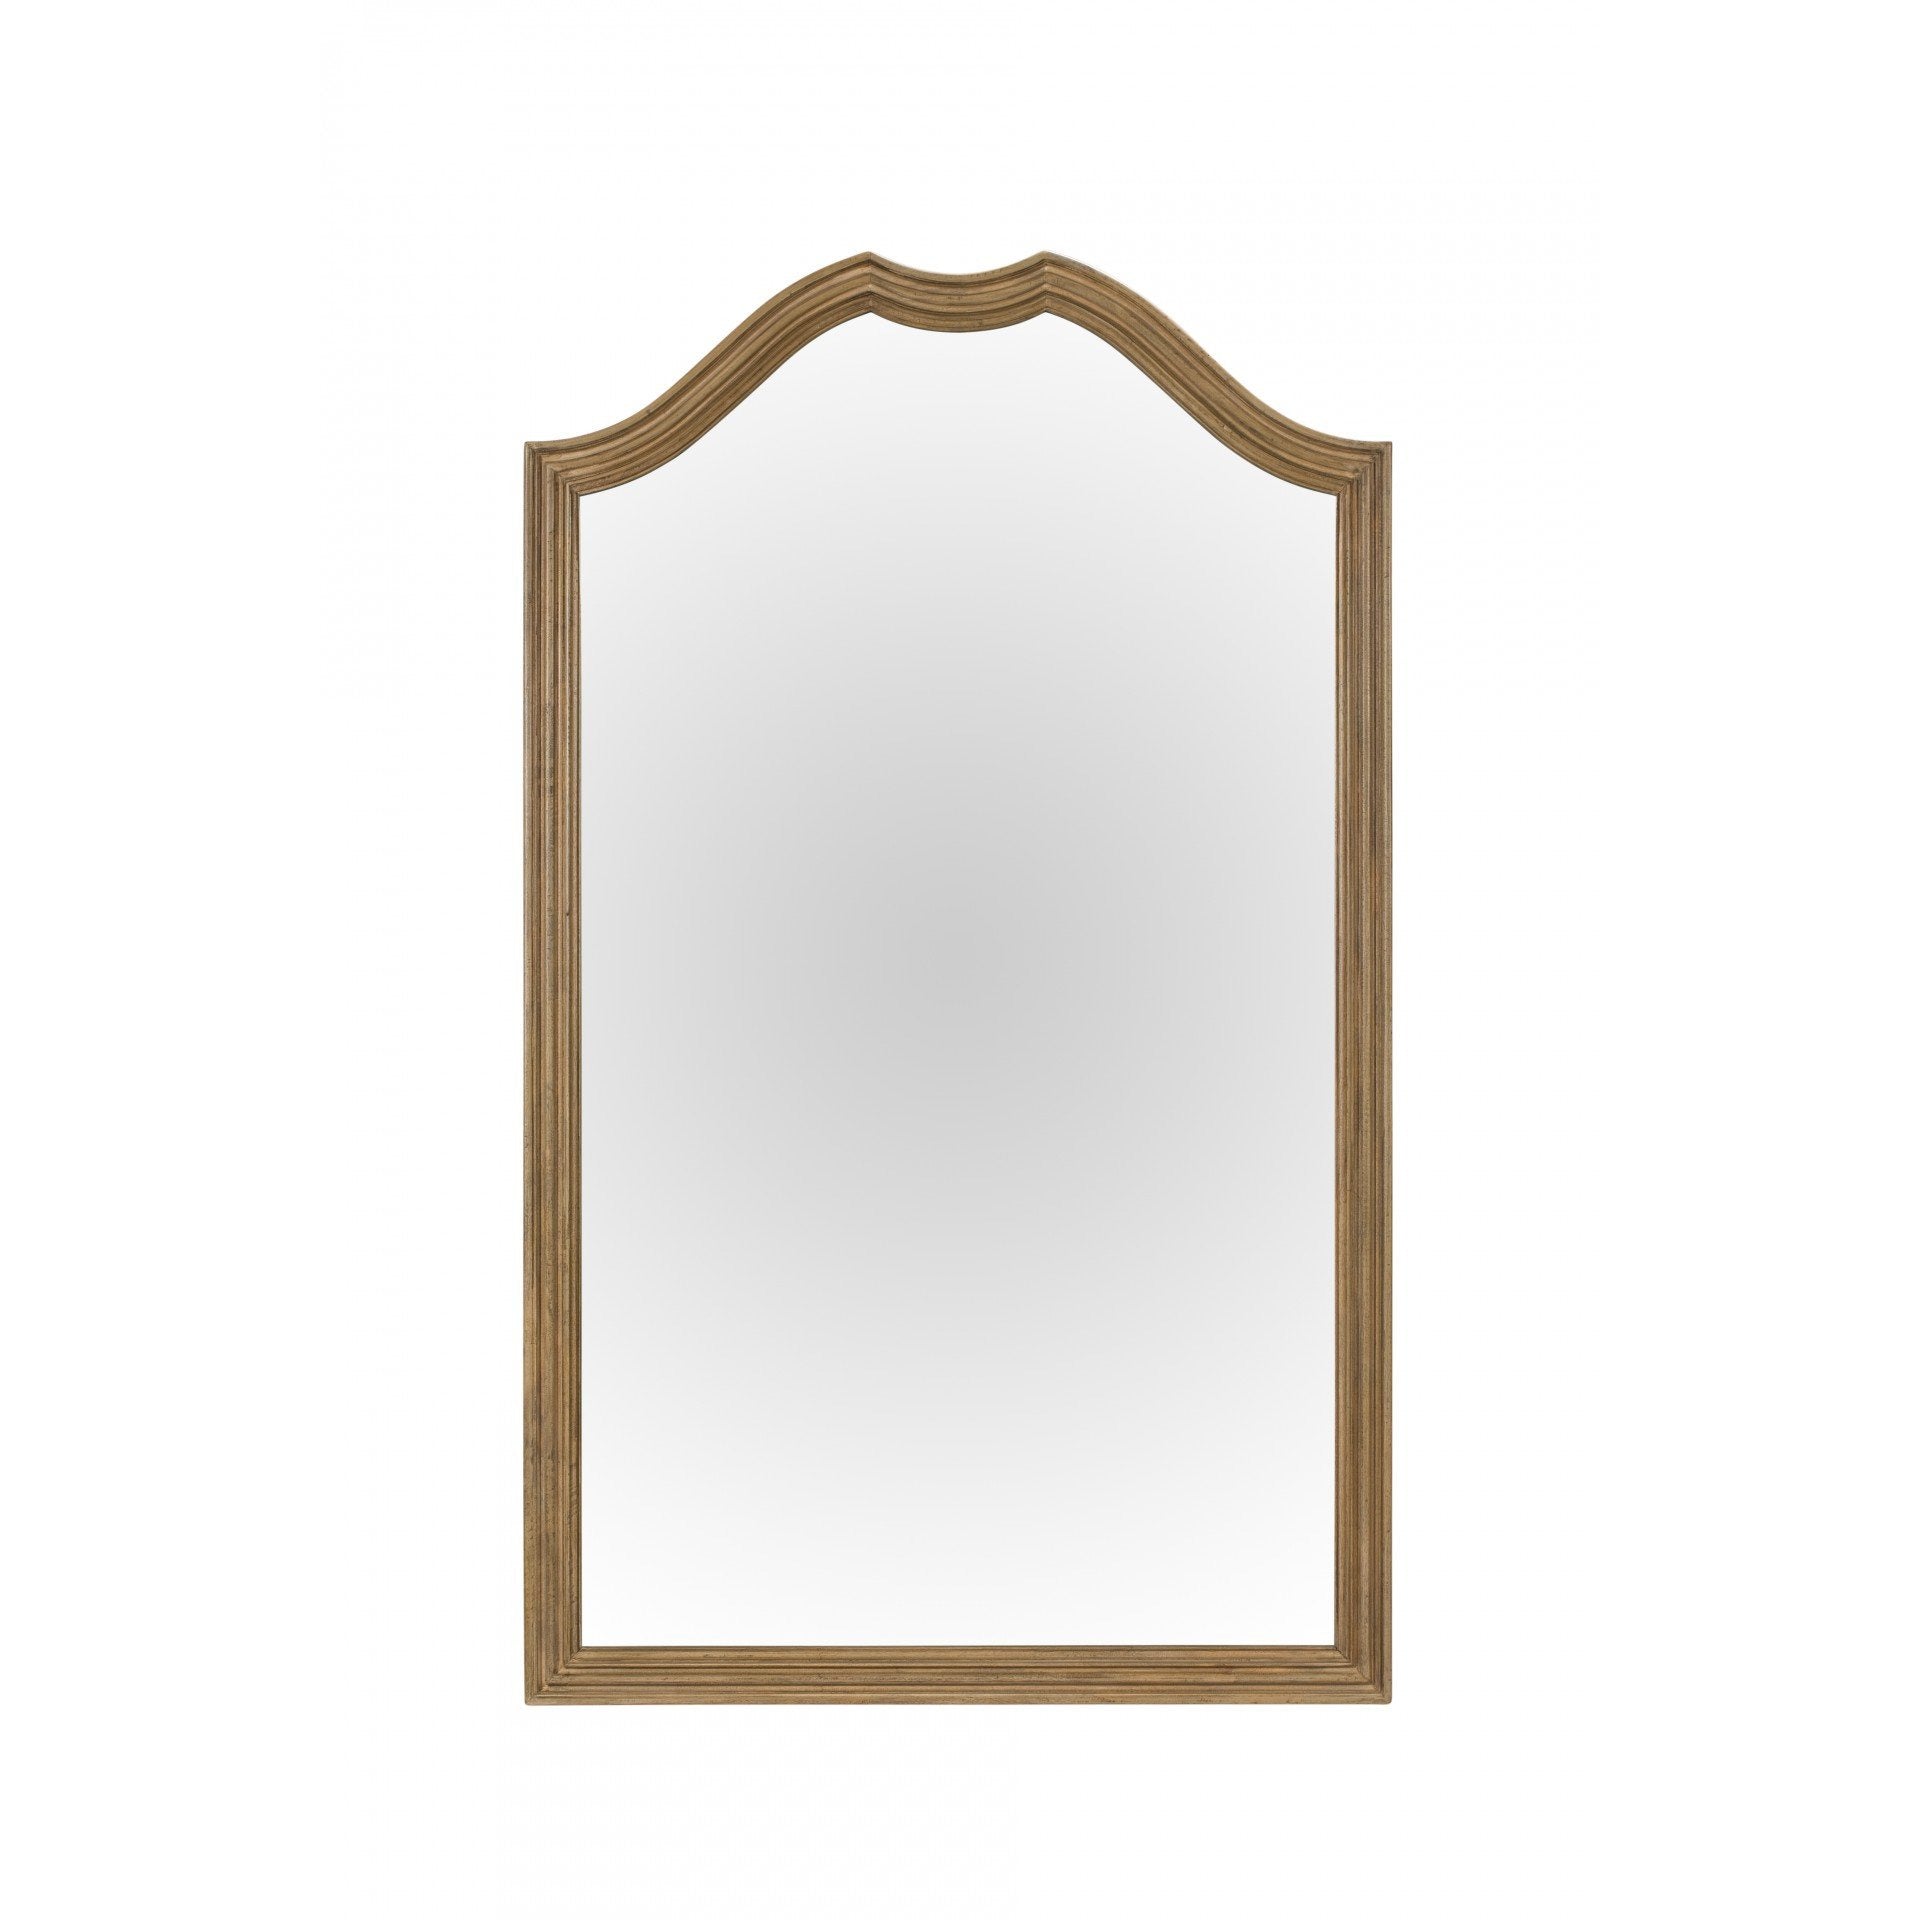 Hardy Victoria Mirror from Upstairs Downstairs Furniture in Lisburn, Monaghan and Enniskillen